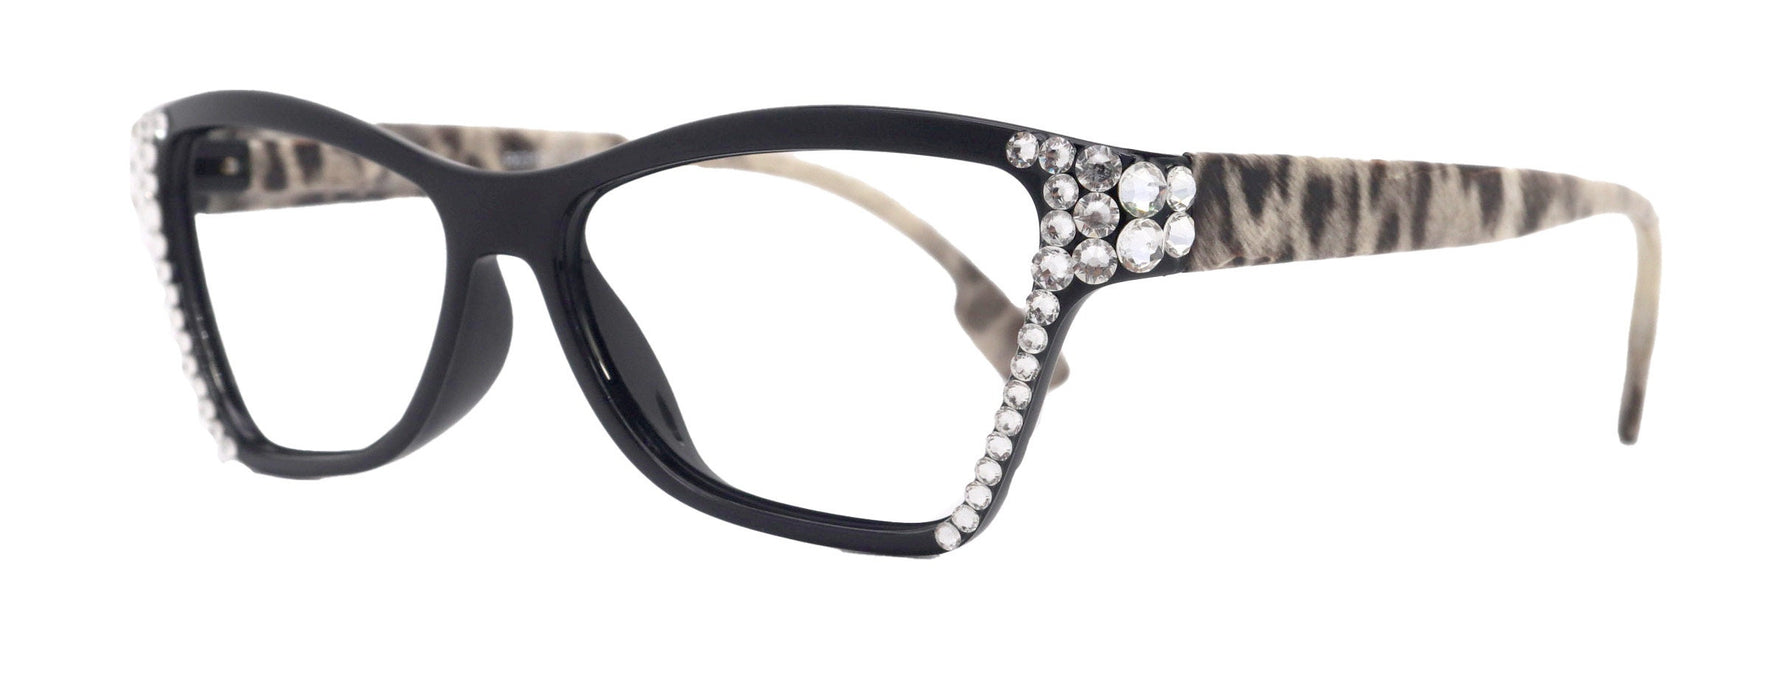 Avian, (Bling) Women Reading Glasses w (Clear) Genuine European Crystals, Magnifying Cat Eye (Black) NY Fifth Avenue